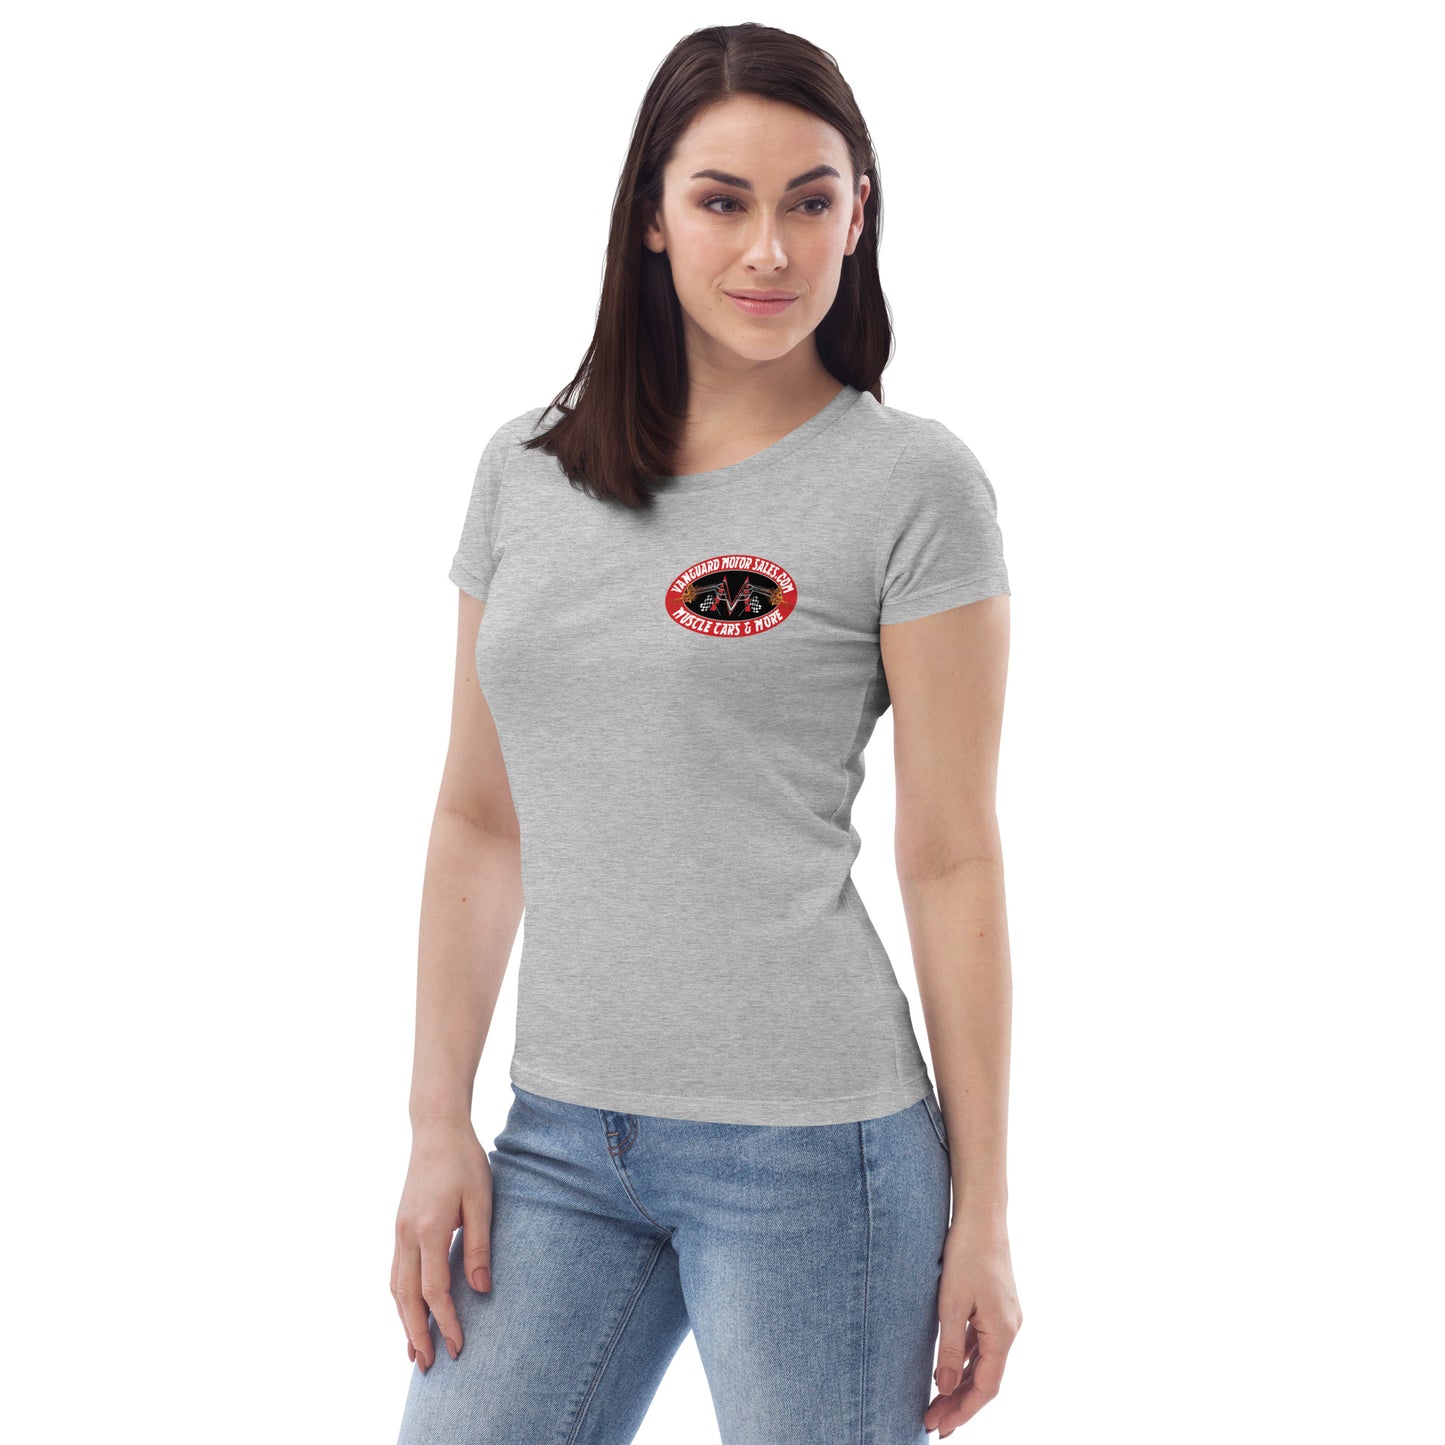 Women's Eco Fitted Tee